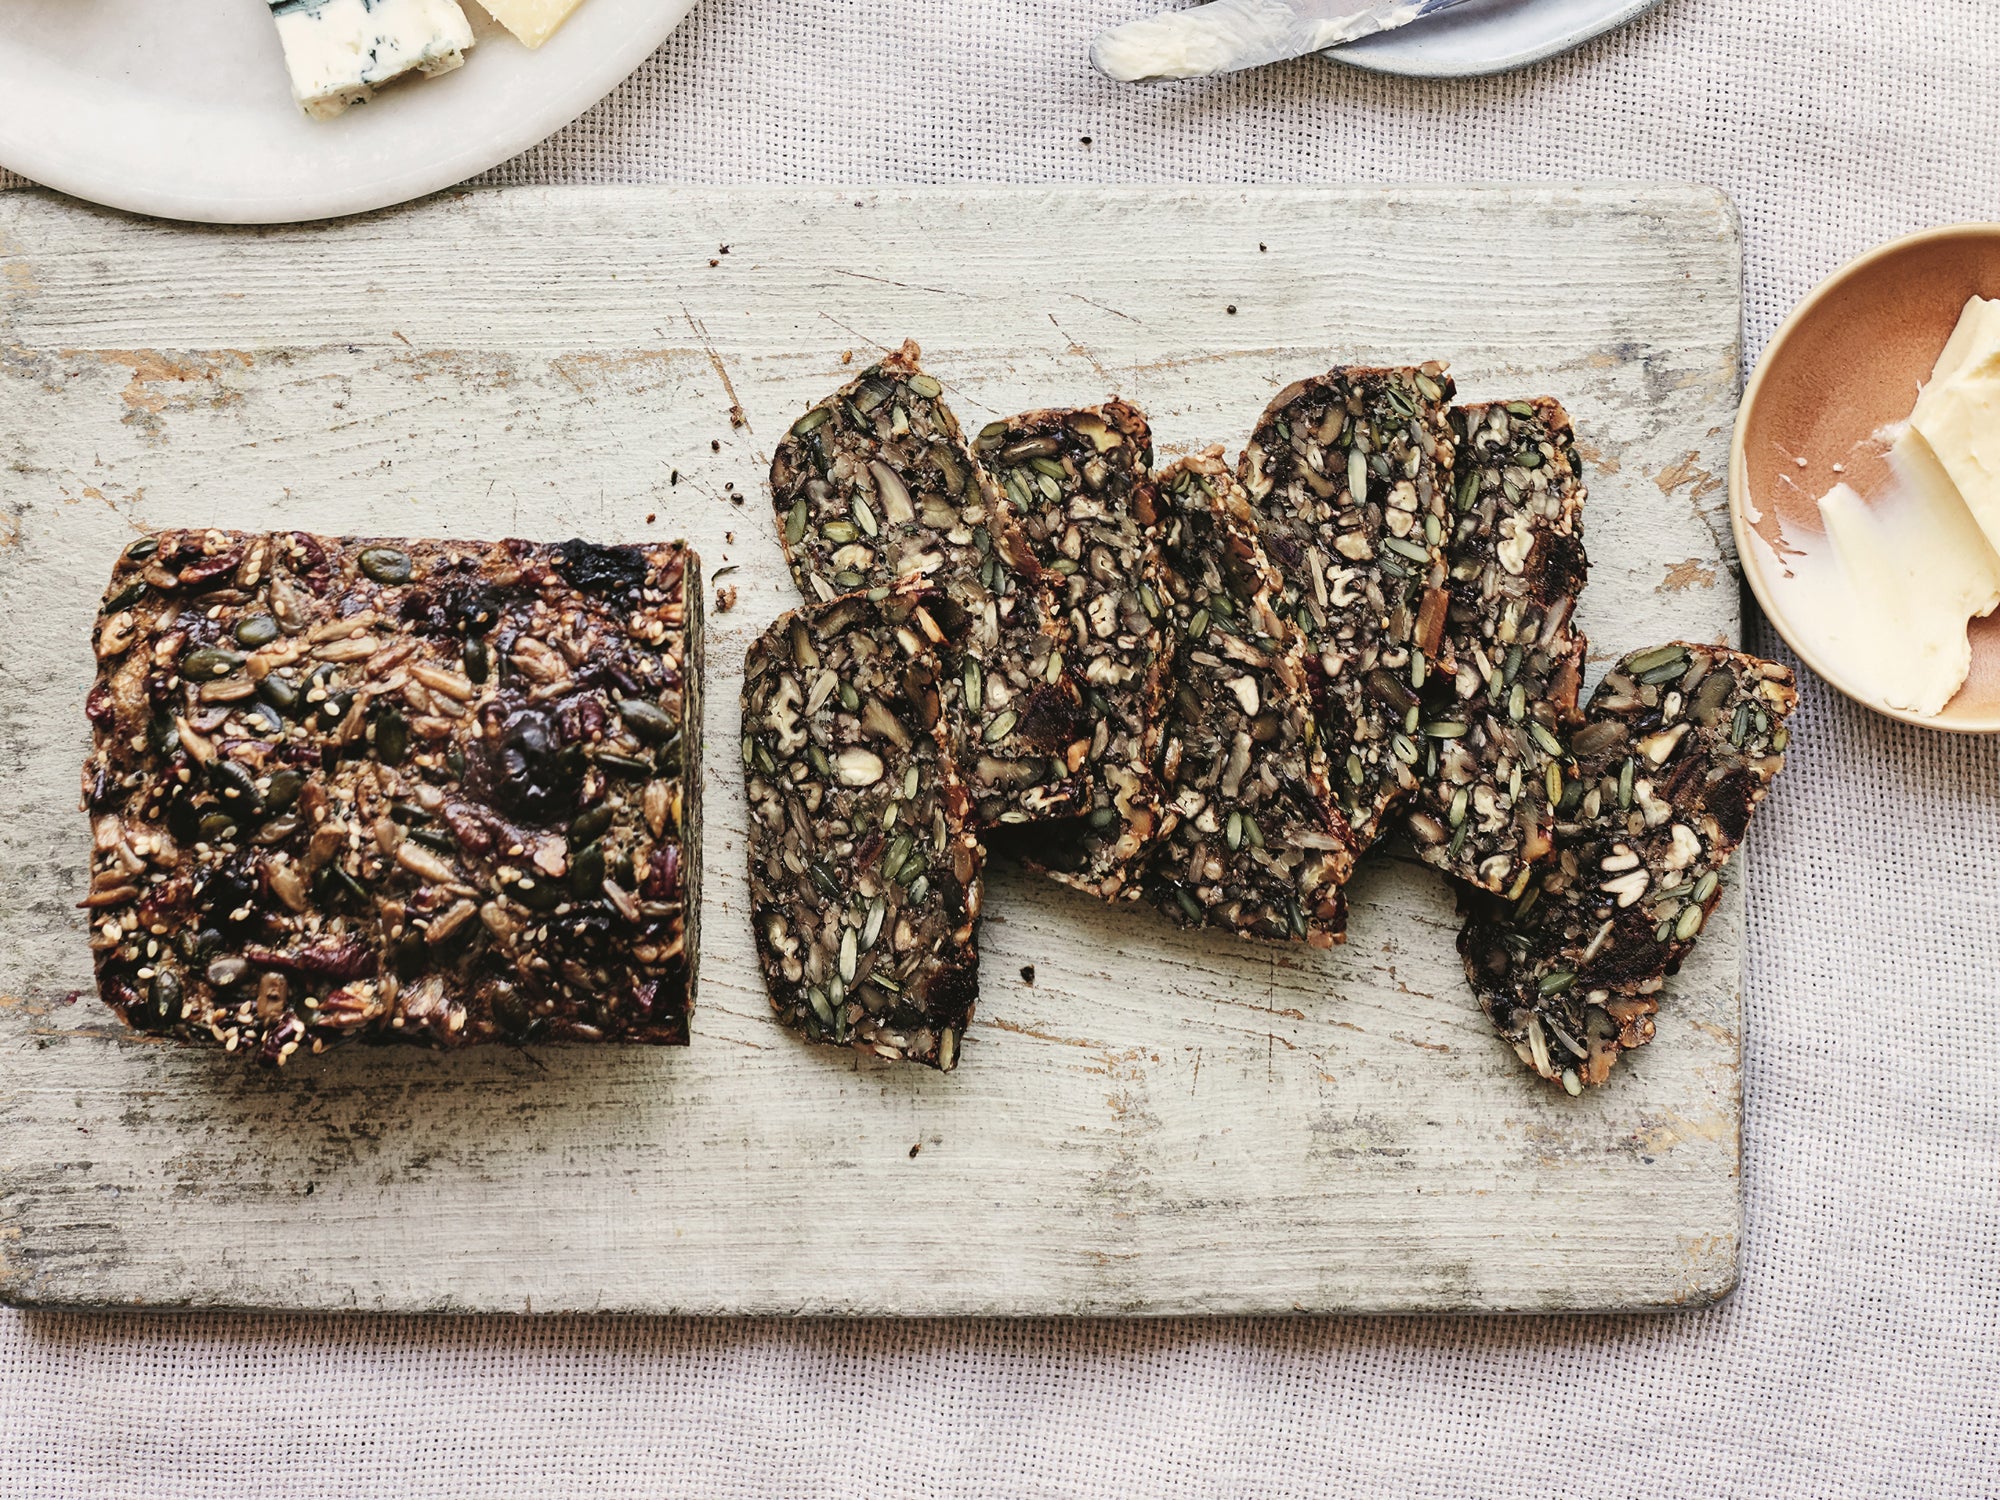 Swap out your sourdough for this seeded number